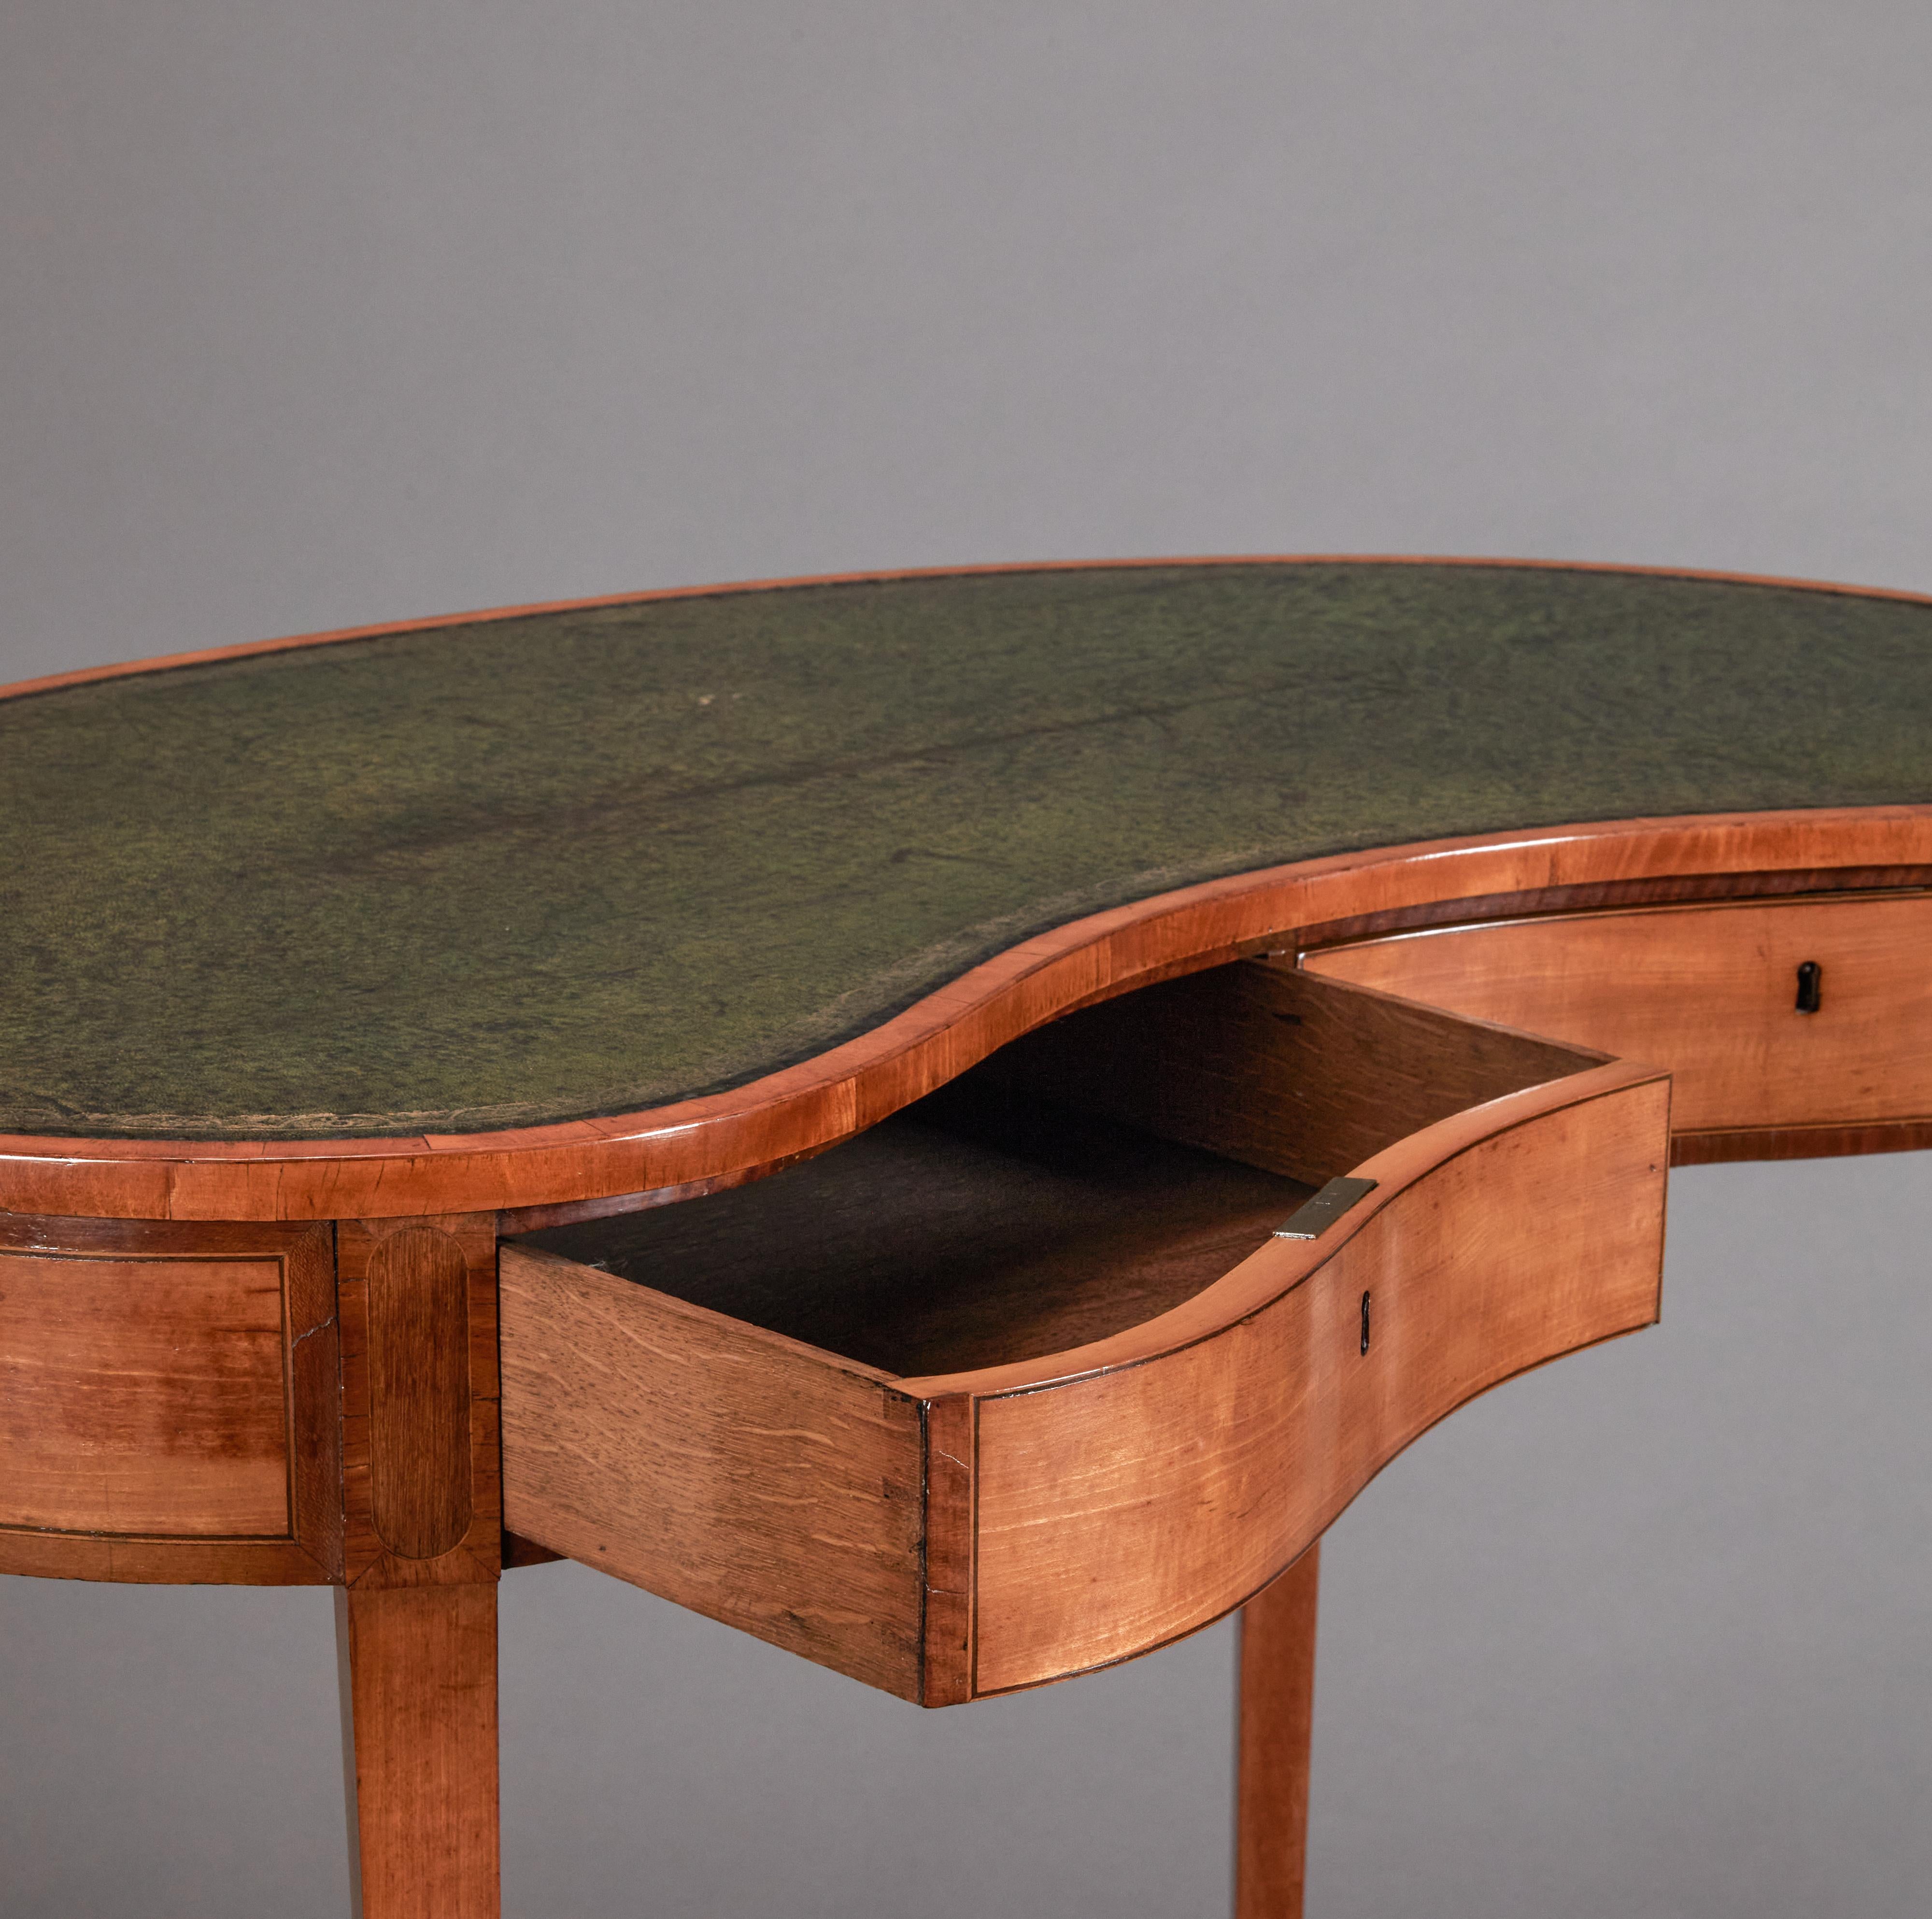 Satinwood and tulipwood veneered kidney shaped writing table. Beautifully patinaed green leather top with embossed gold trim.